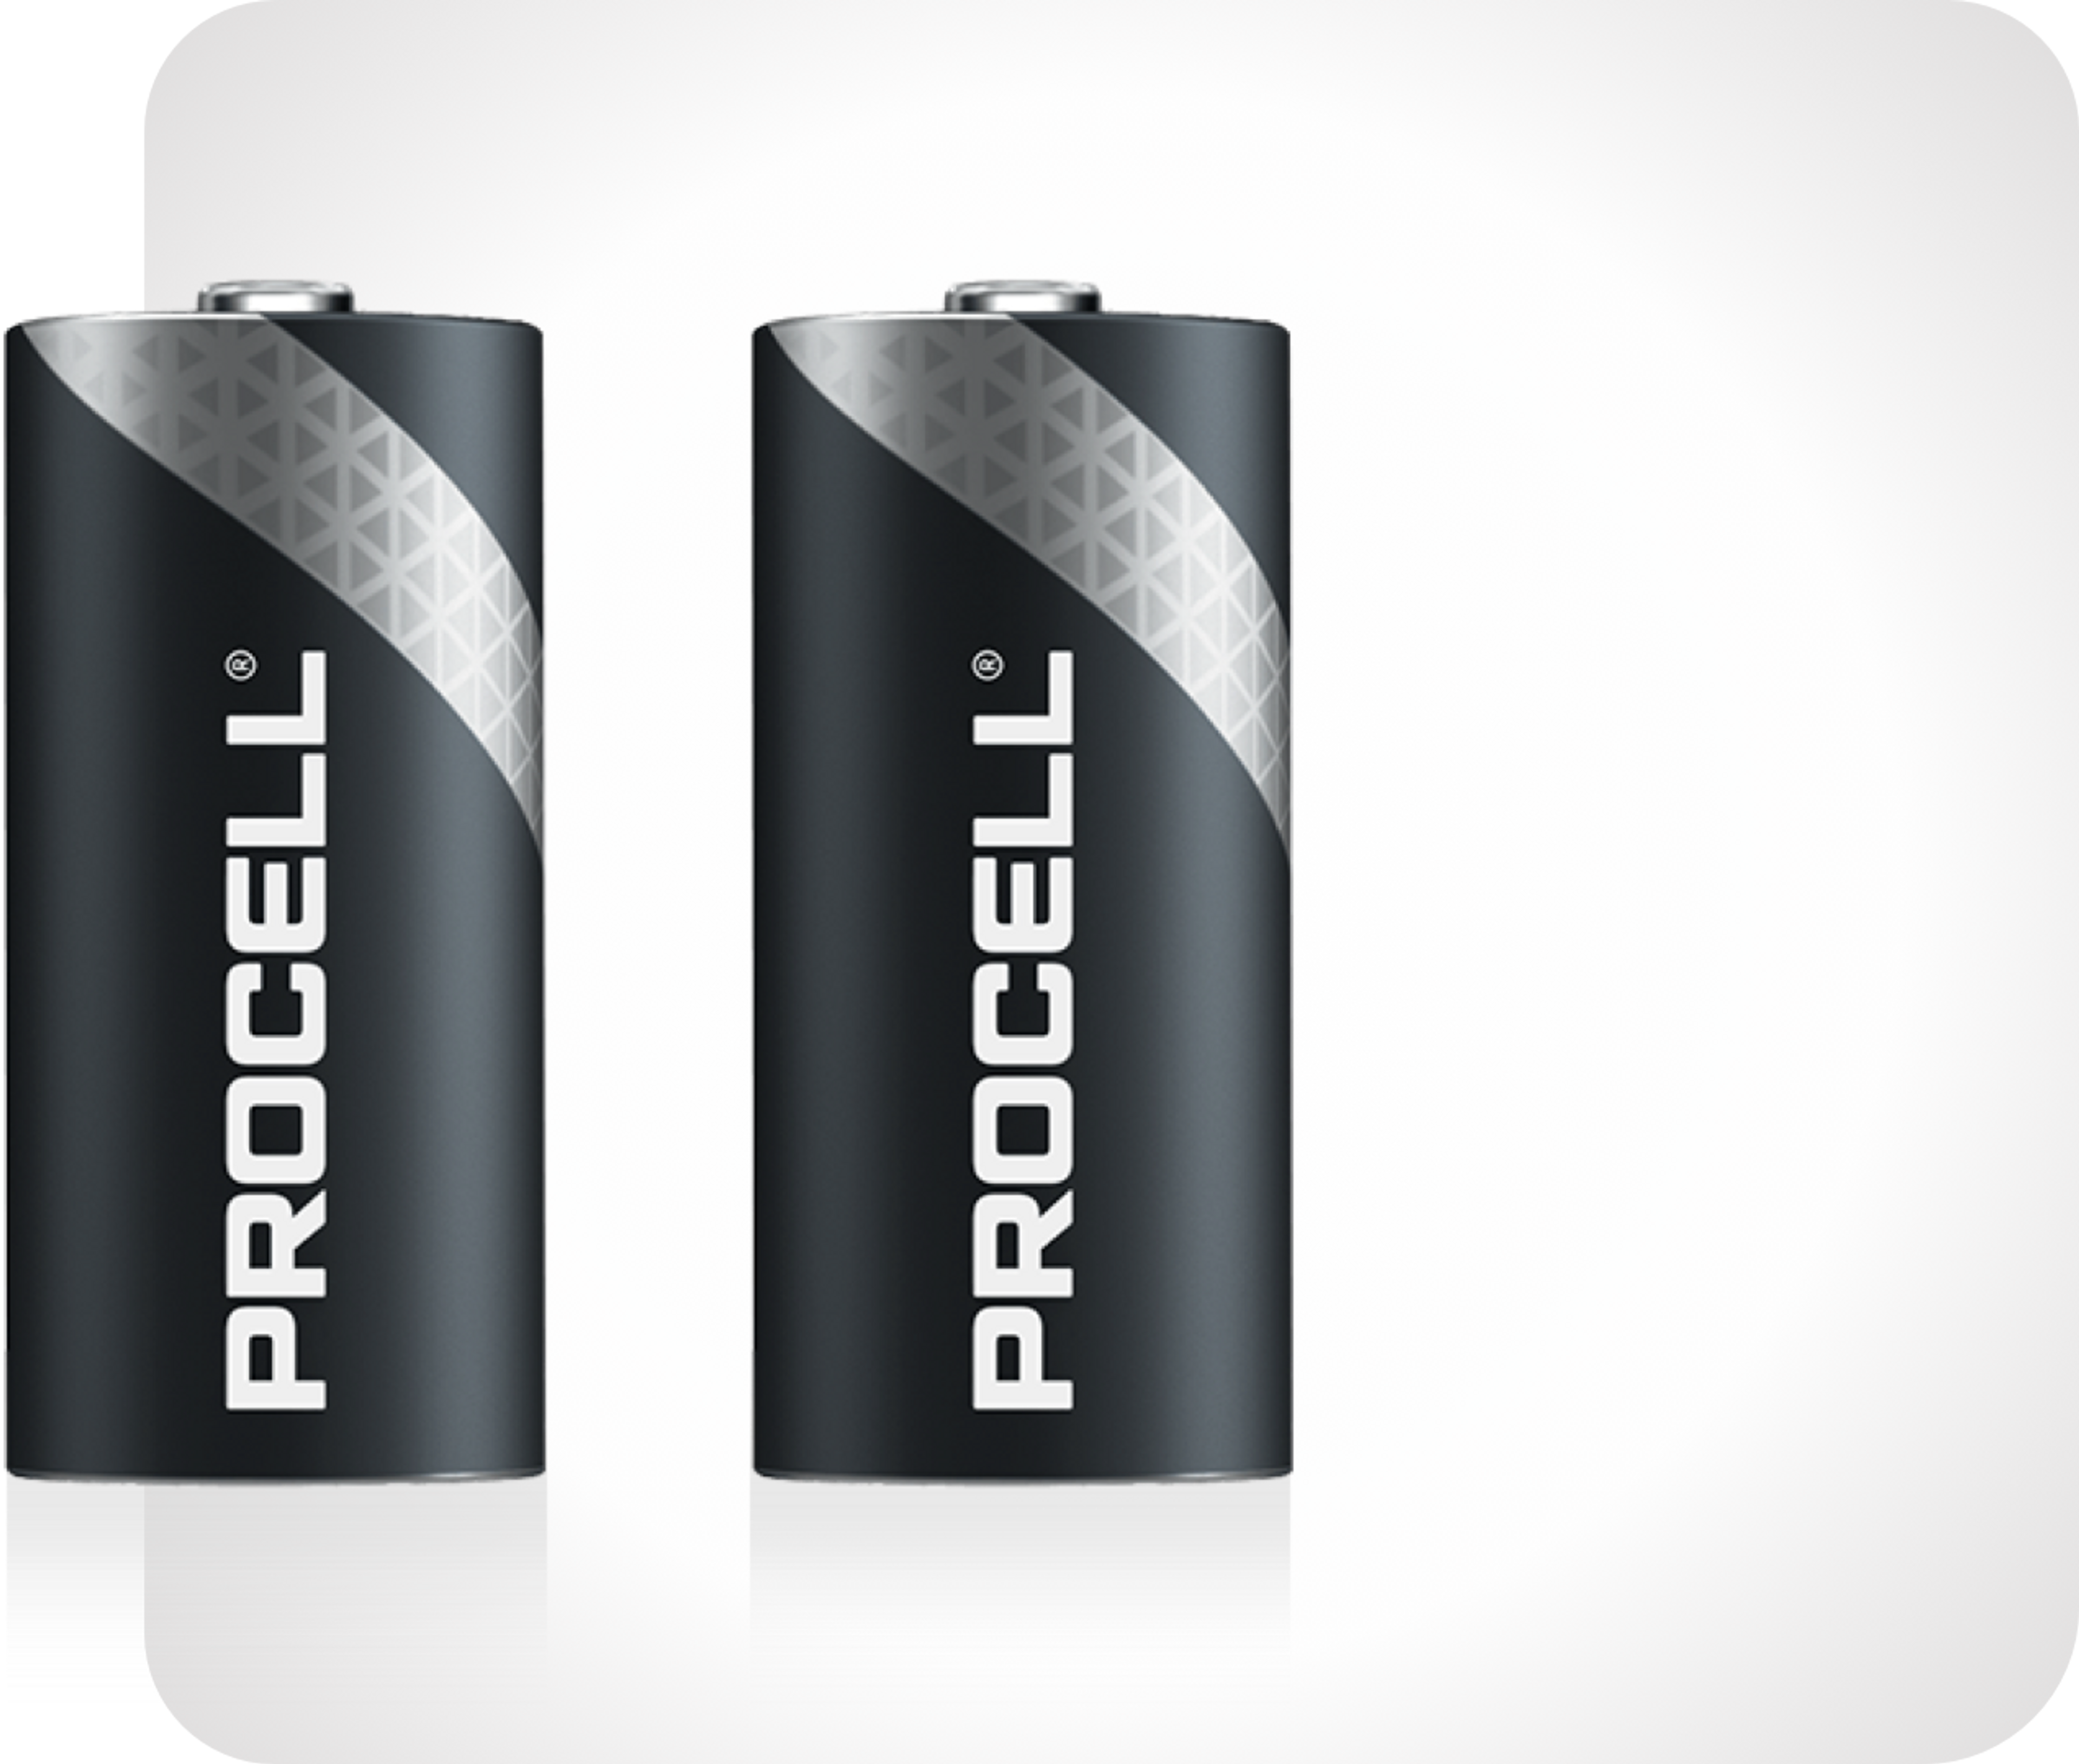 Image of two Procell Lithium batteries